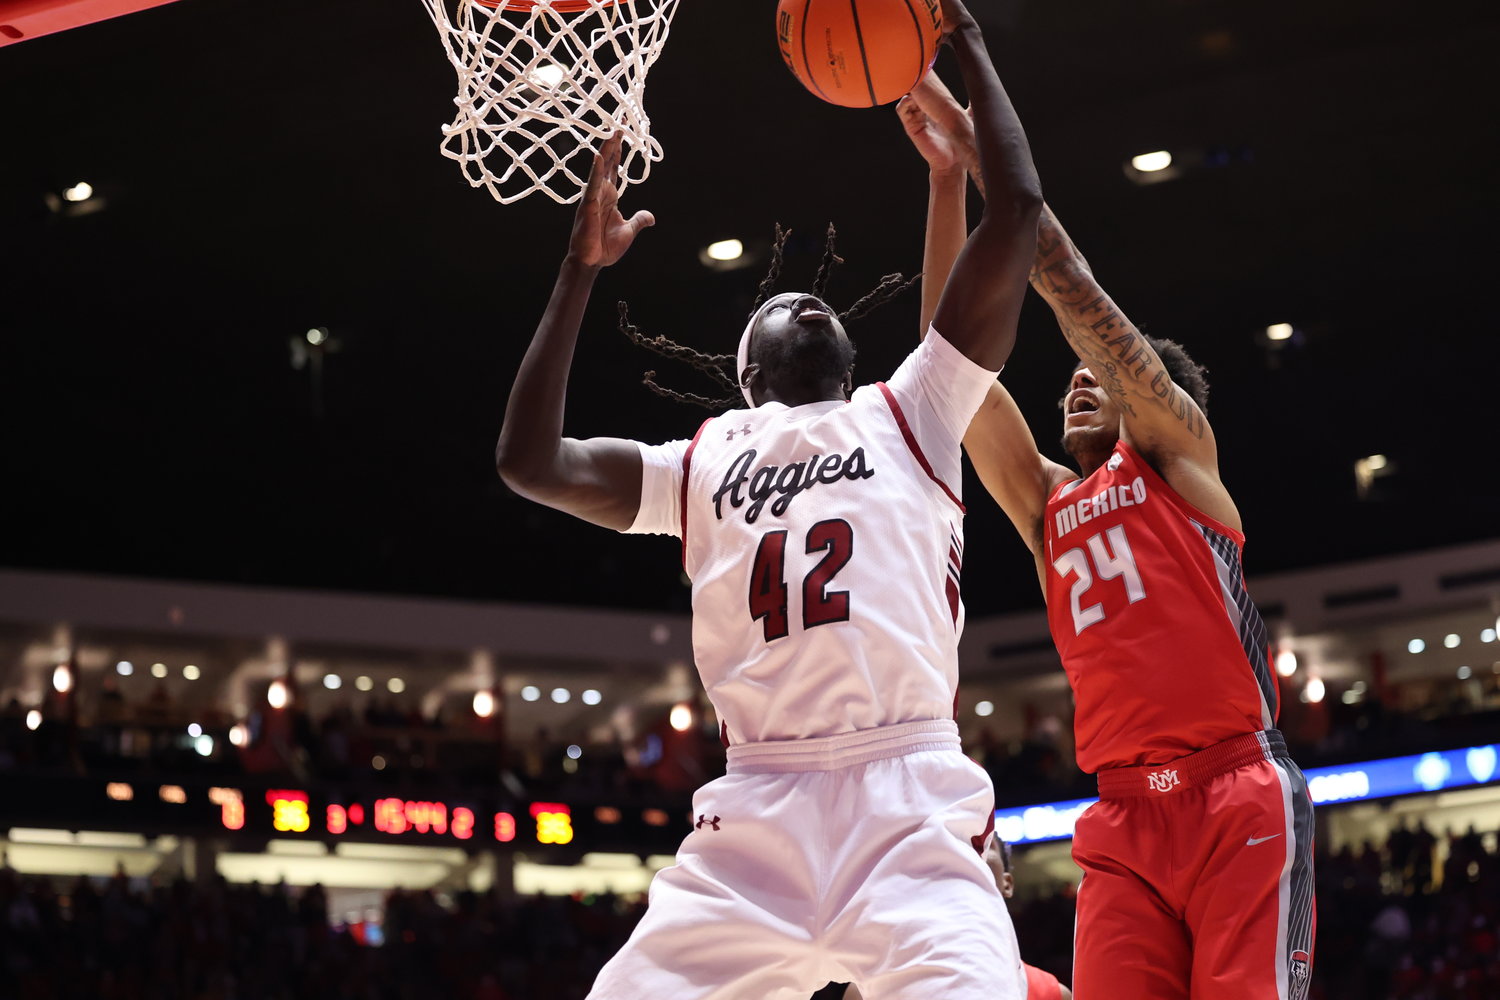 New Mexico State’s Yuat Alok battles for the ball against the University of New Mexico Dec. 6 at the Pit in Albuquerque.